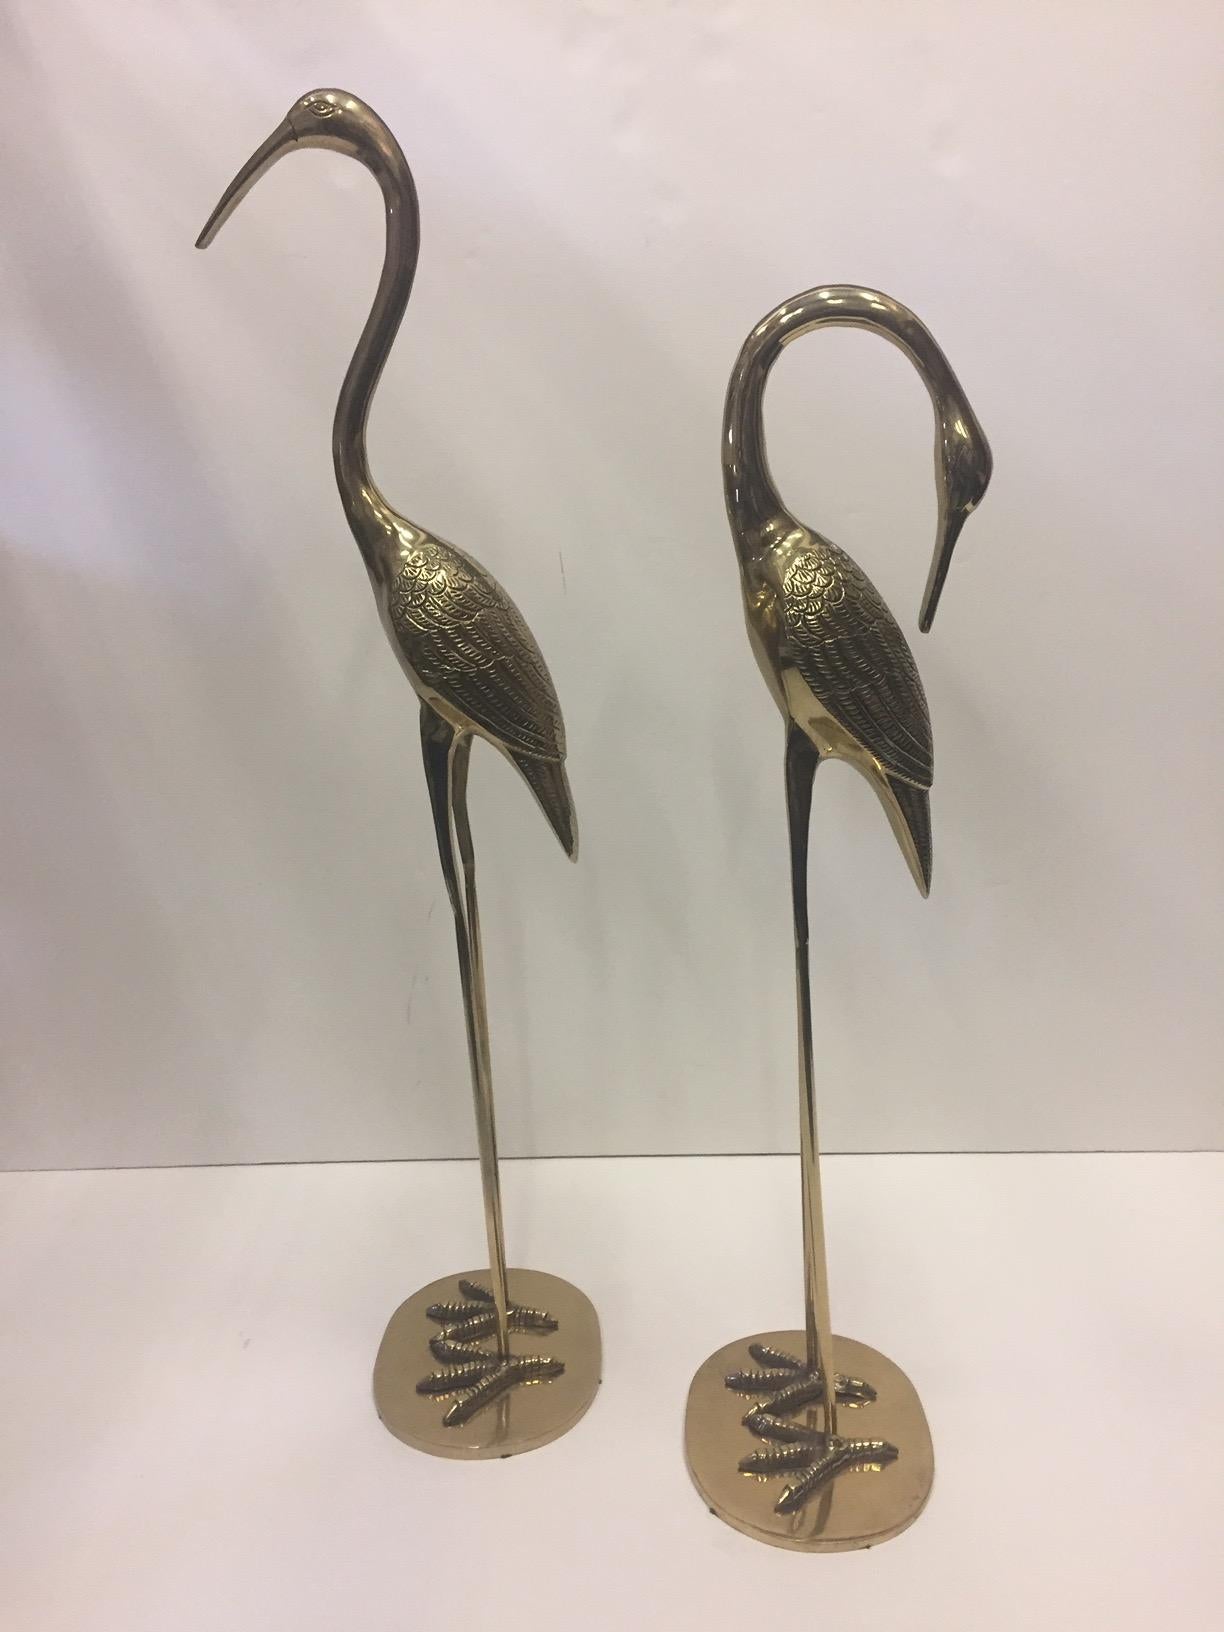 Lovely pair of cast brass cranes striking elegant poses.
Measures: One is 27.5 H, the other 32 H.